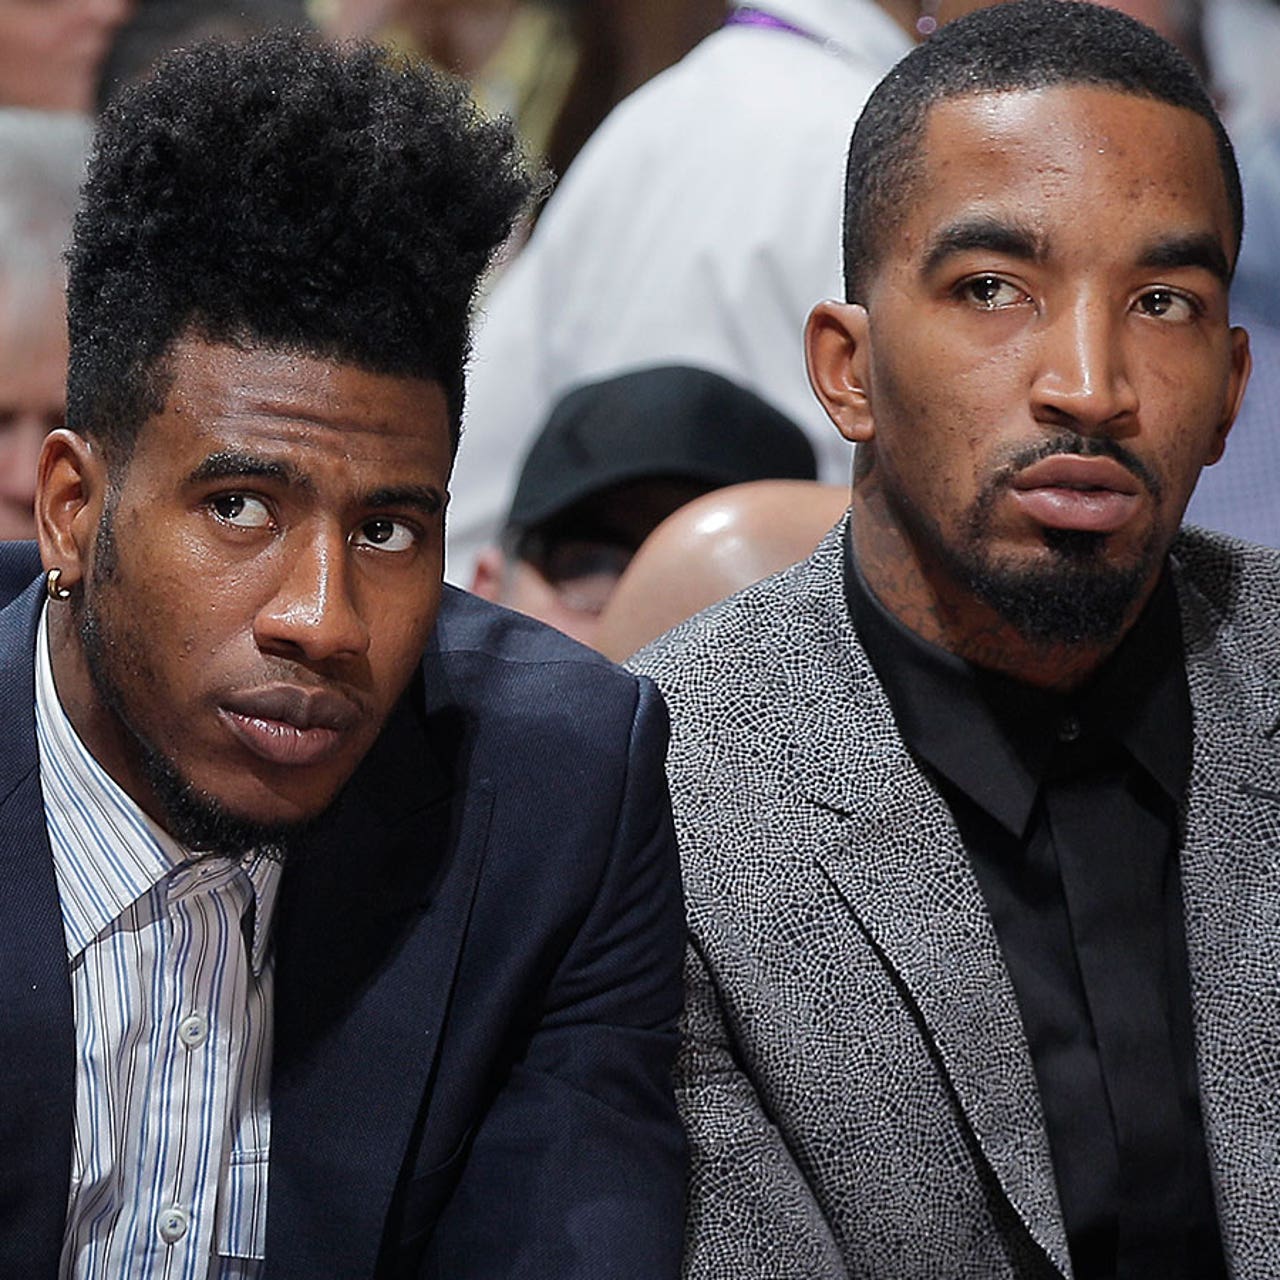 Report: Knicks open to trading Iman Shumpert or J.R. Smith - NBC